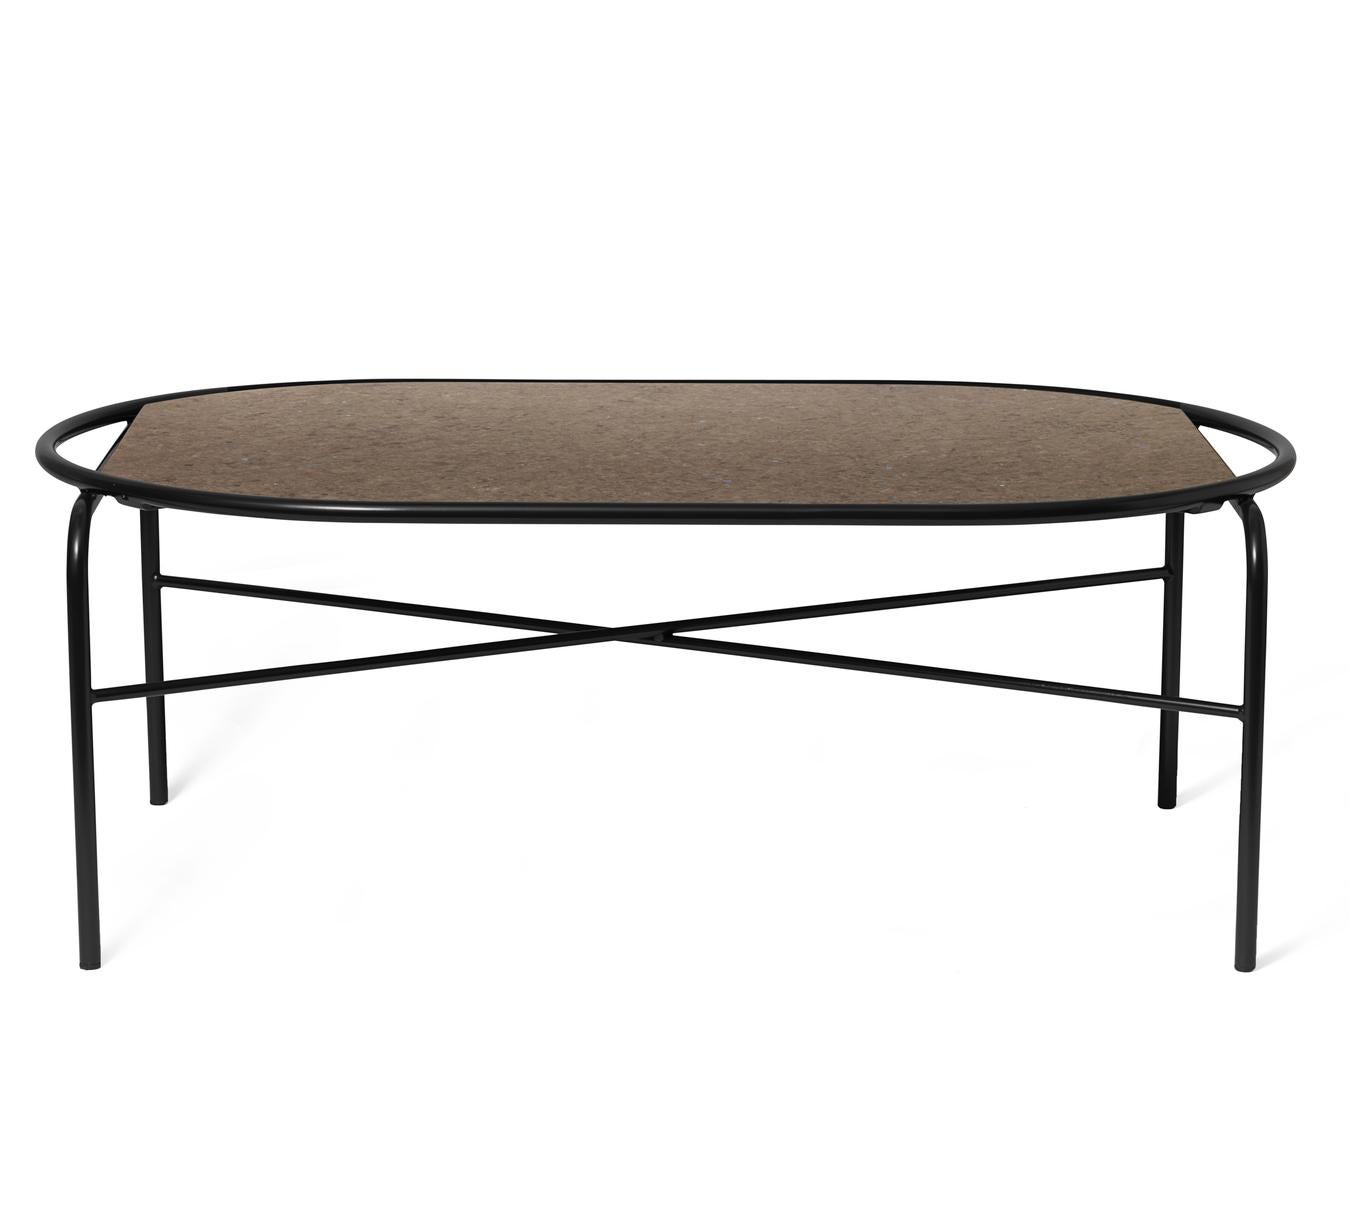 Secant oval table antique brown granite soft black by Warm Nordic
Dimensions: D100 x W60 x H36 cm
Material: Granite , Powder coated steel
Weight: 9 kg
Also available in different finishes and dimensions. 

Elegant coffee table that combines a